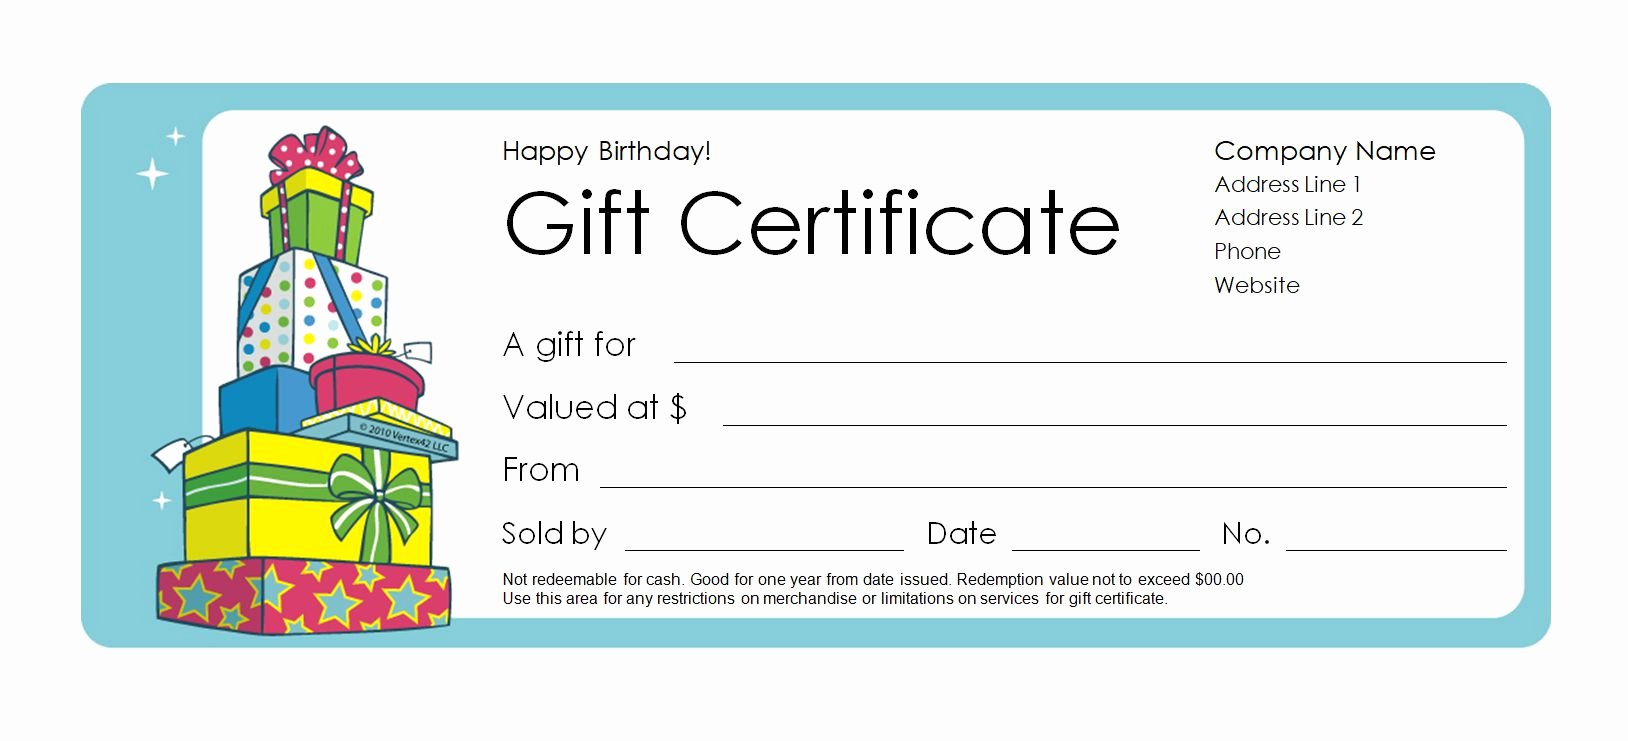 Donation Certificate Template Free Best Of 173 Free Gift Certificate Templates You Can Customize